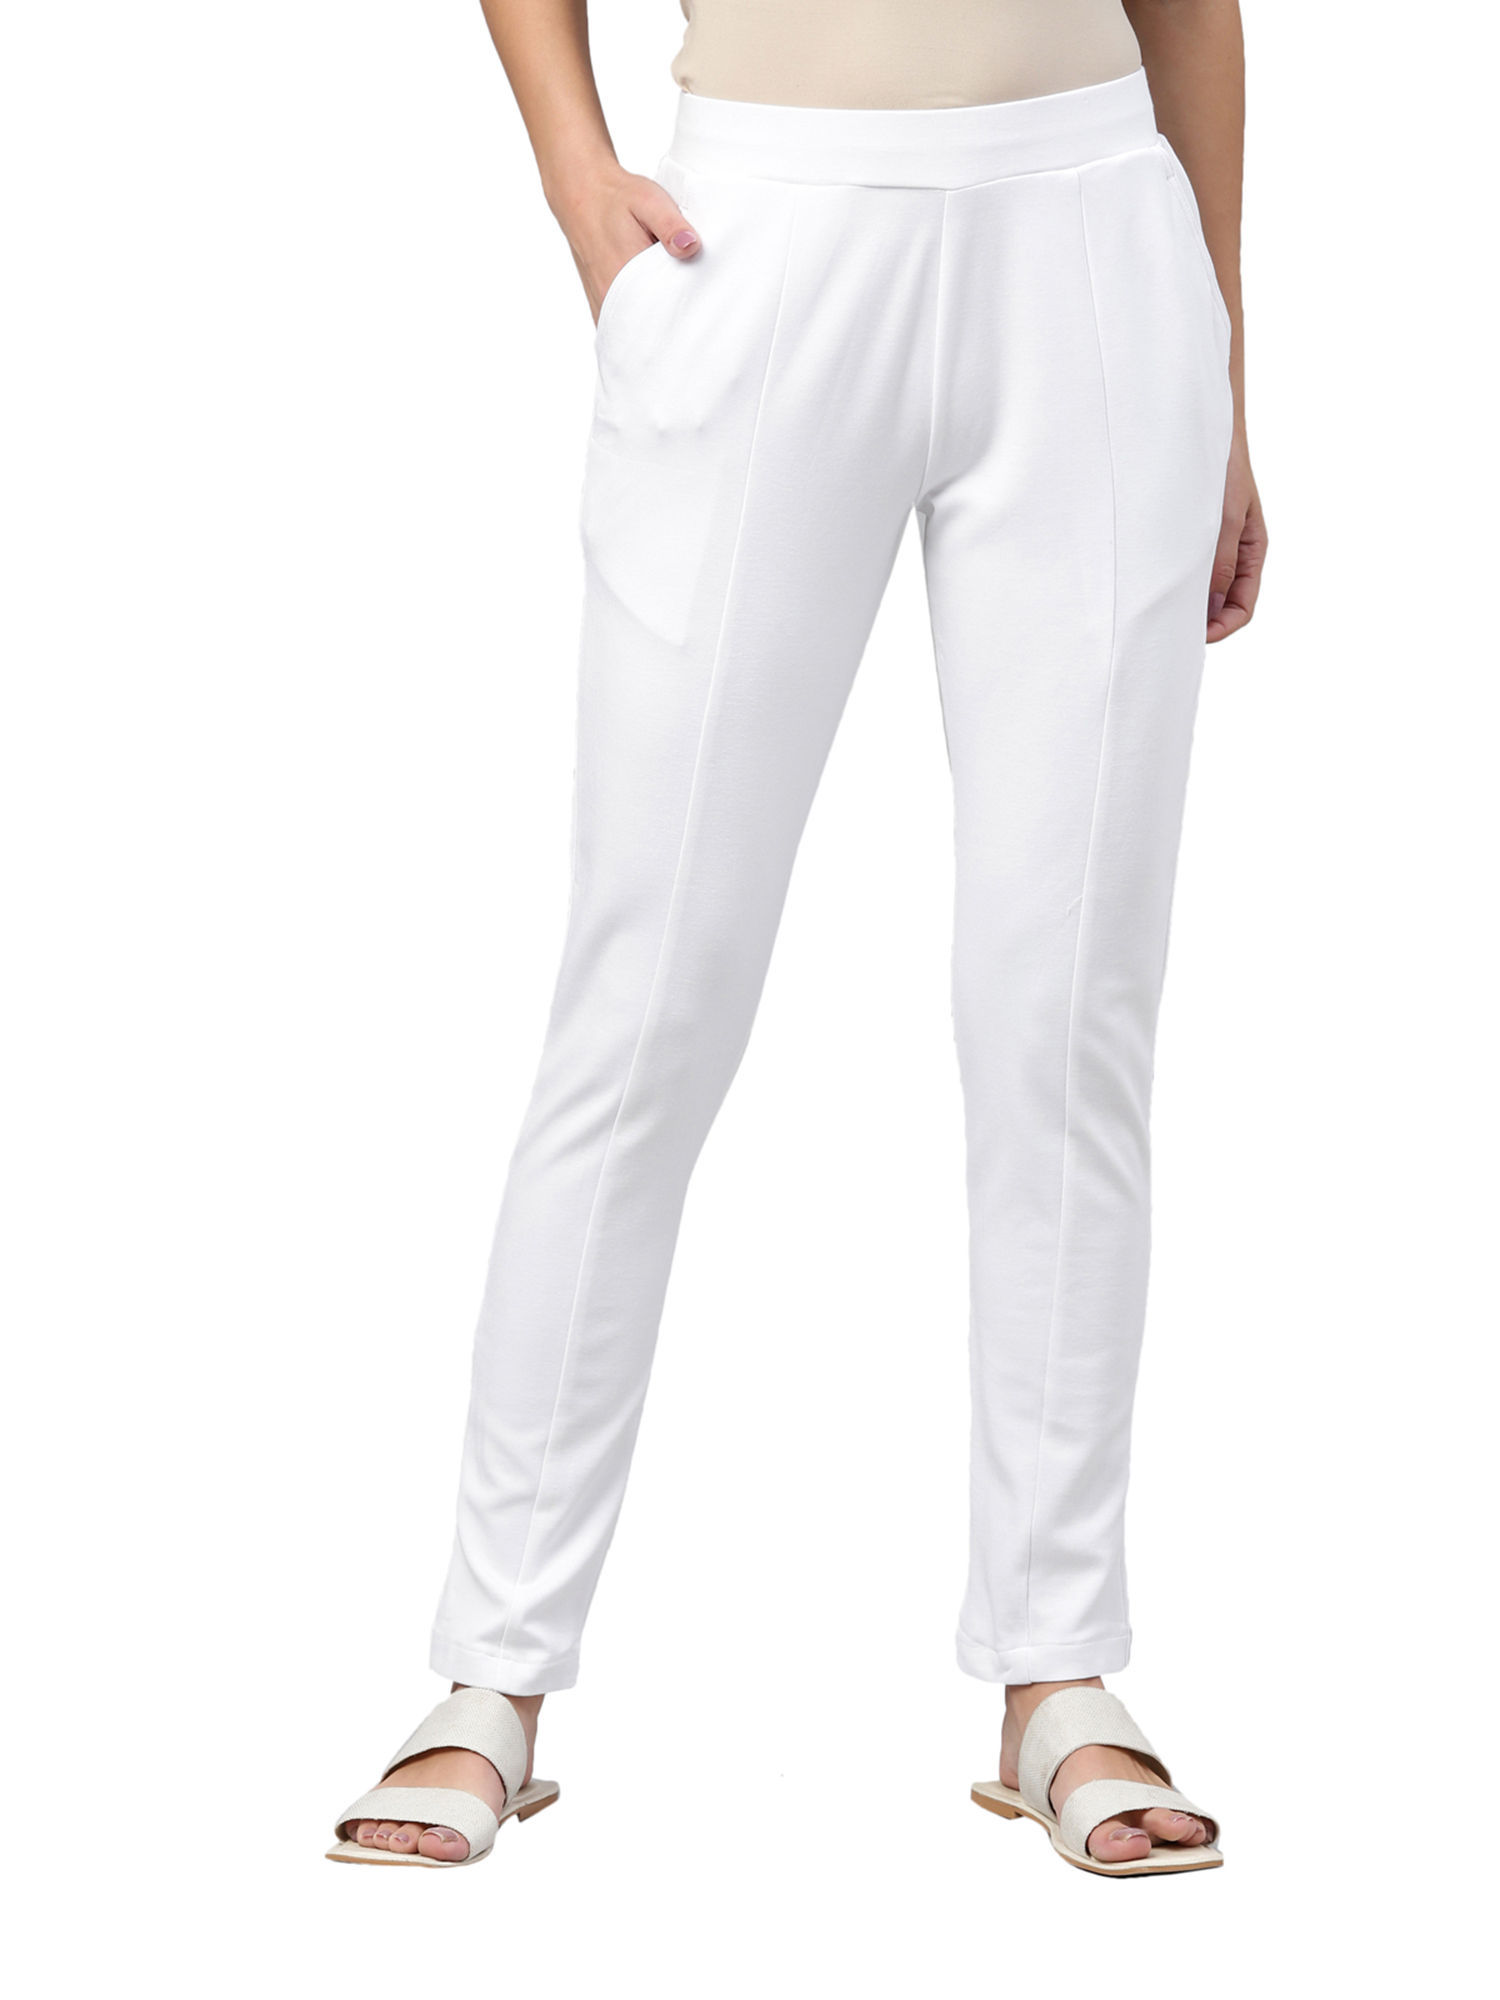 Buy Shopbering Womens White Cotton Stretch Pleated Hem Lace Casual Pants  at Amazonin